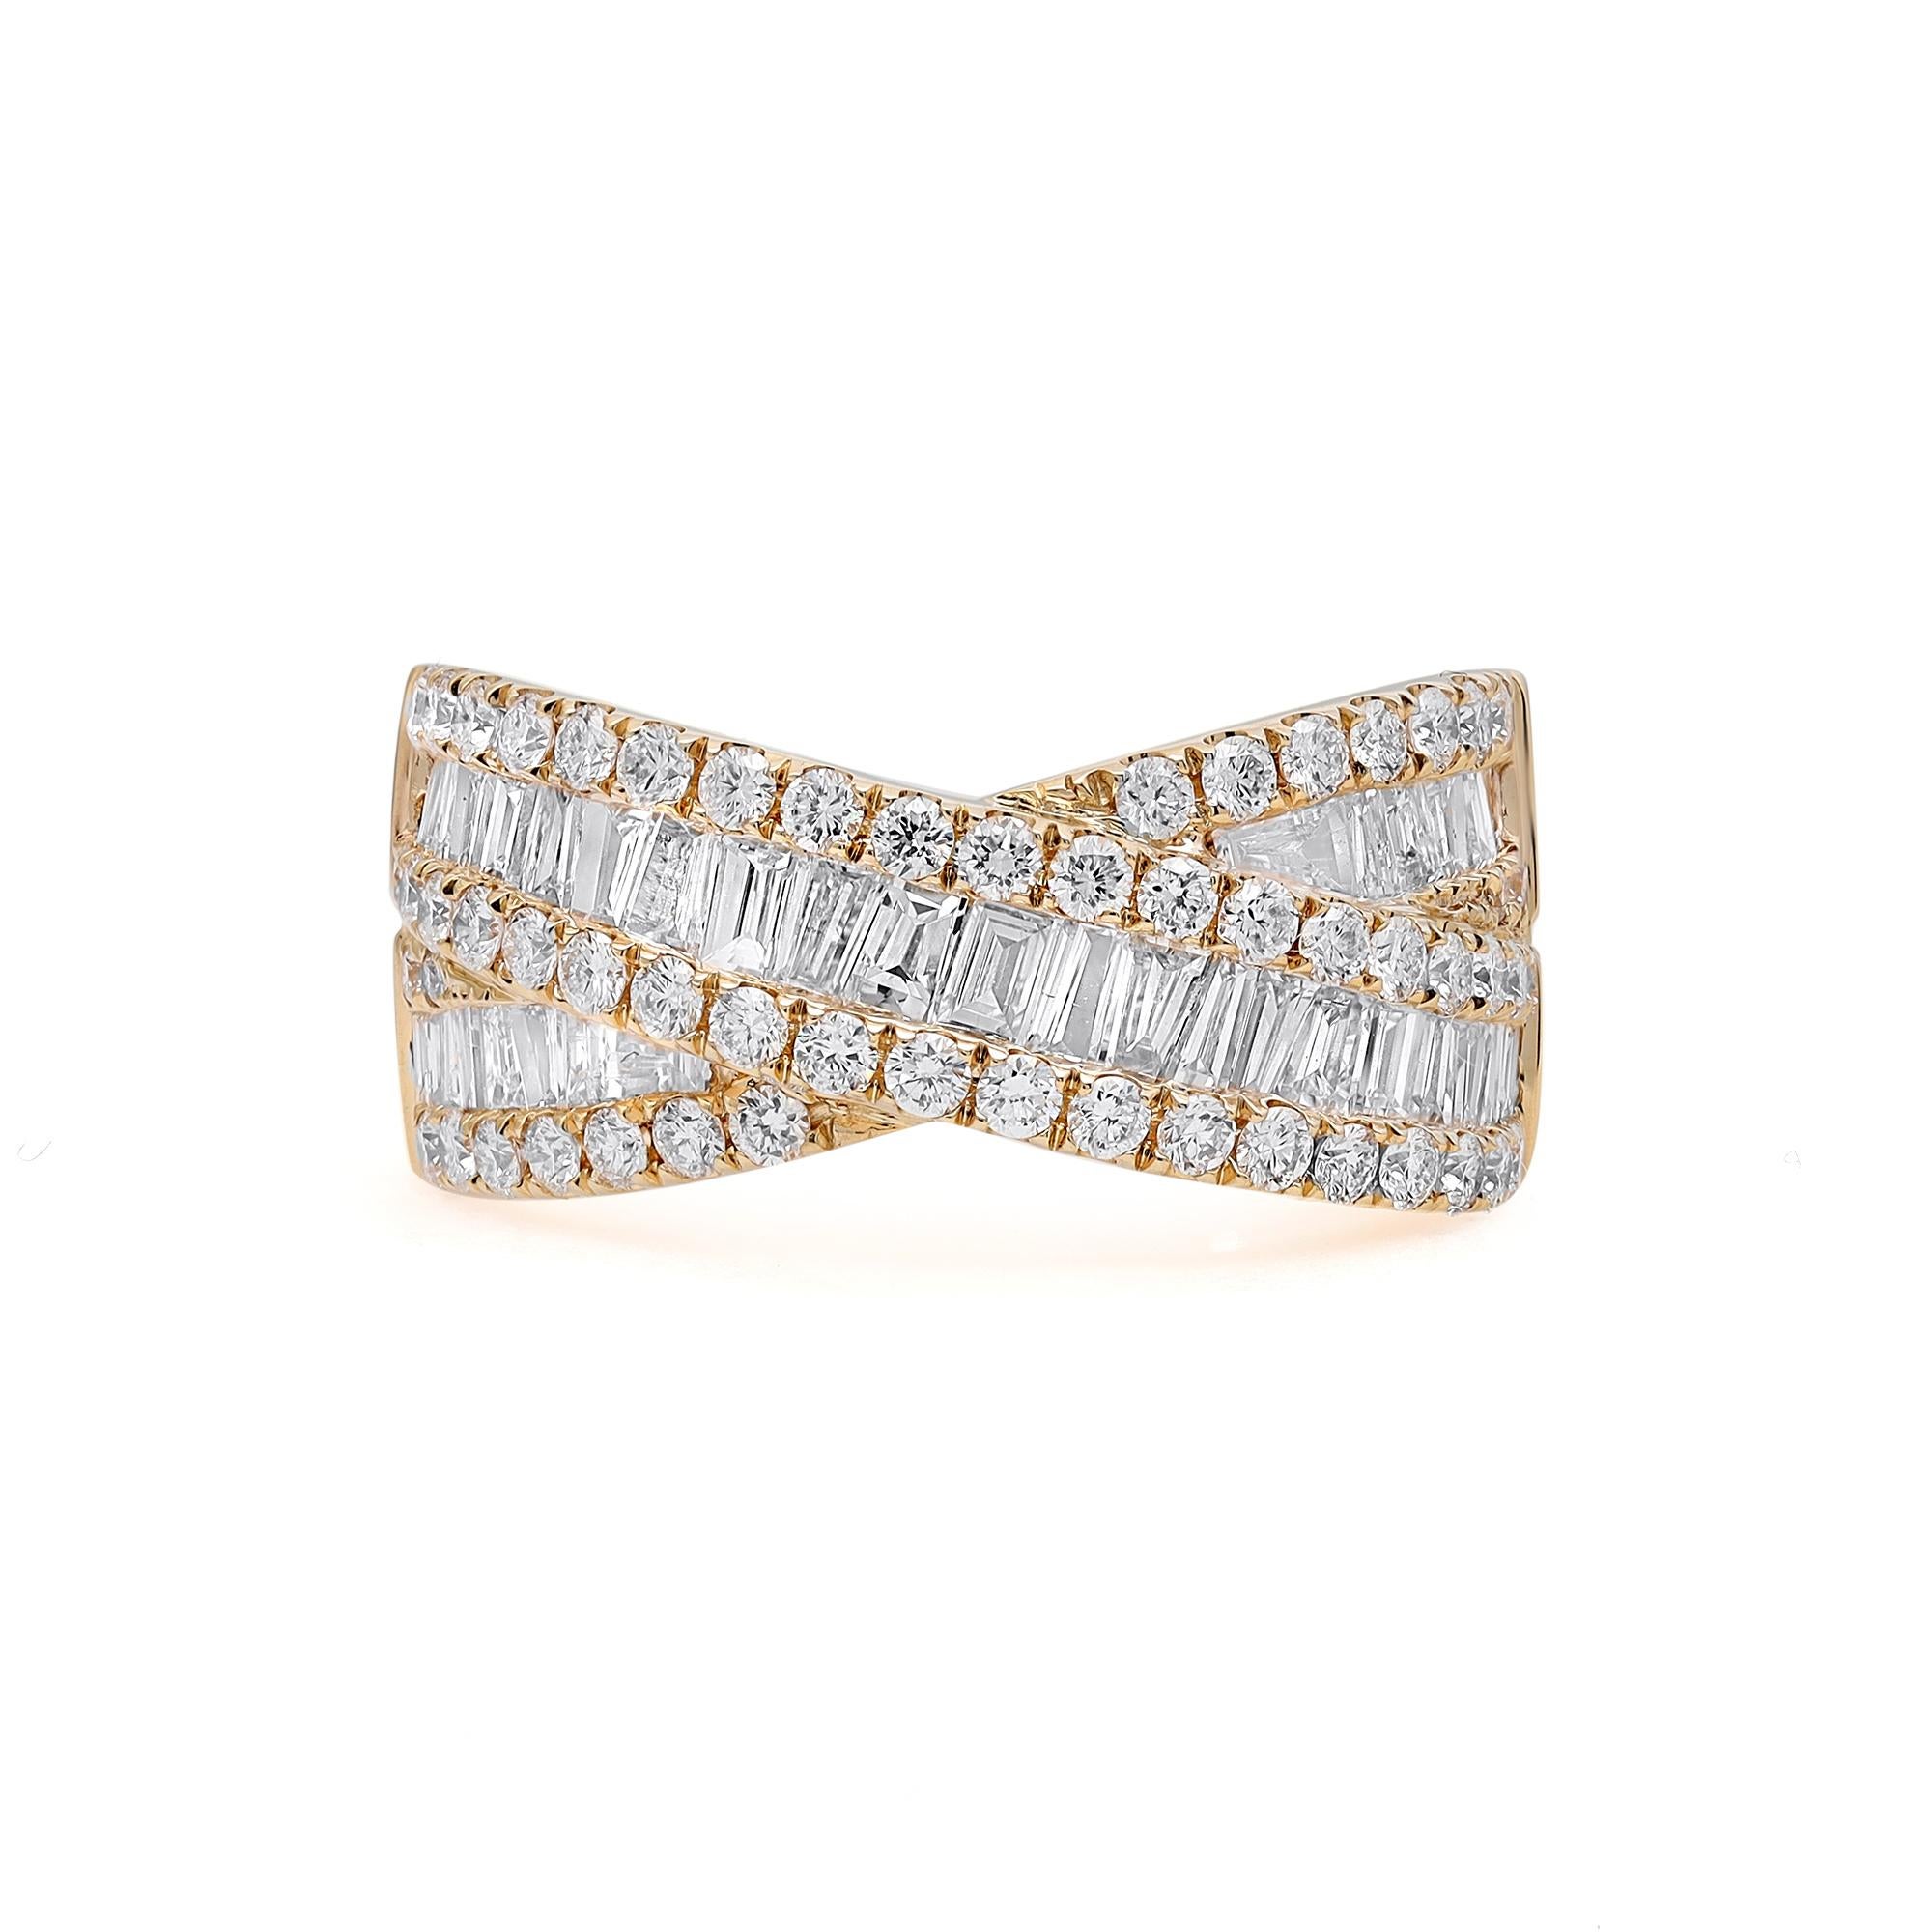 Simple yet dramatic, this crisscross diamond band ring makes a perfect statement look. Crafted in 18K yellow gold. It features a total of 91 diamonds comprising of channel set baguette cut and prong set round brilliant cut diamonds. Total diamond